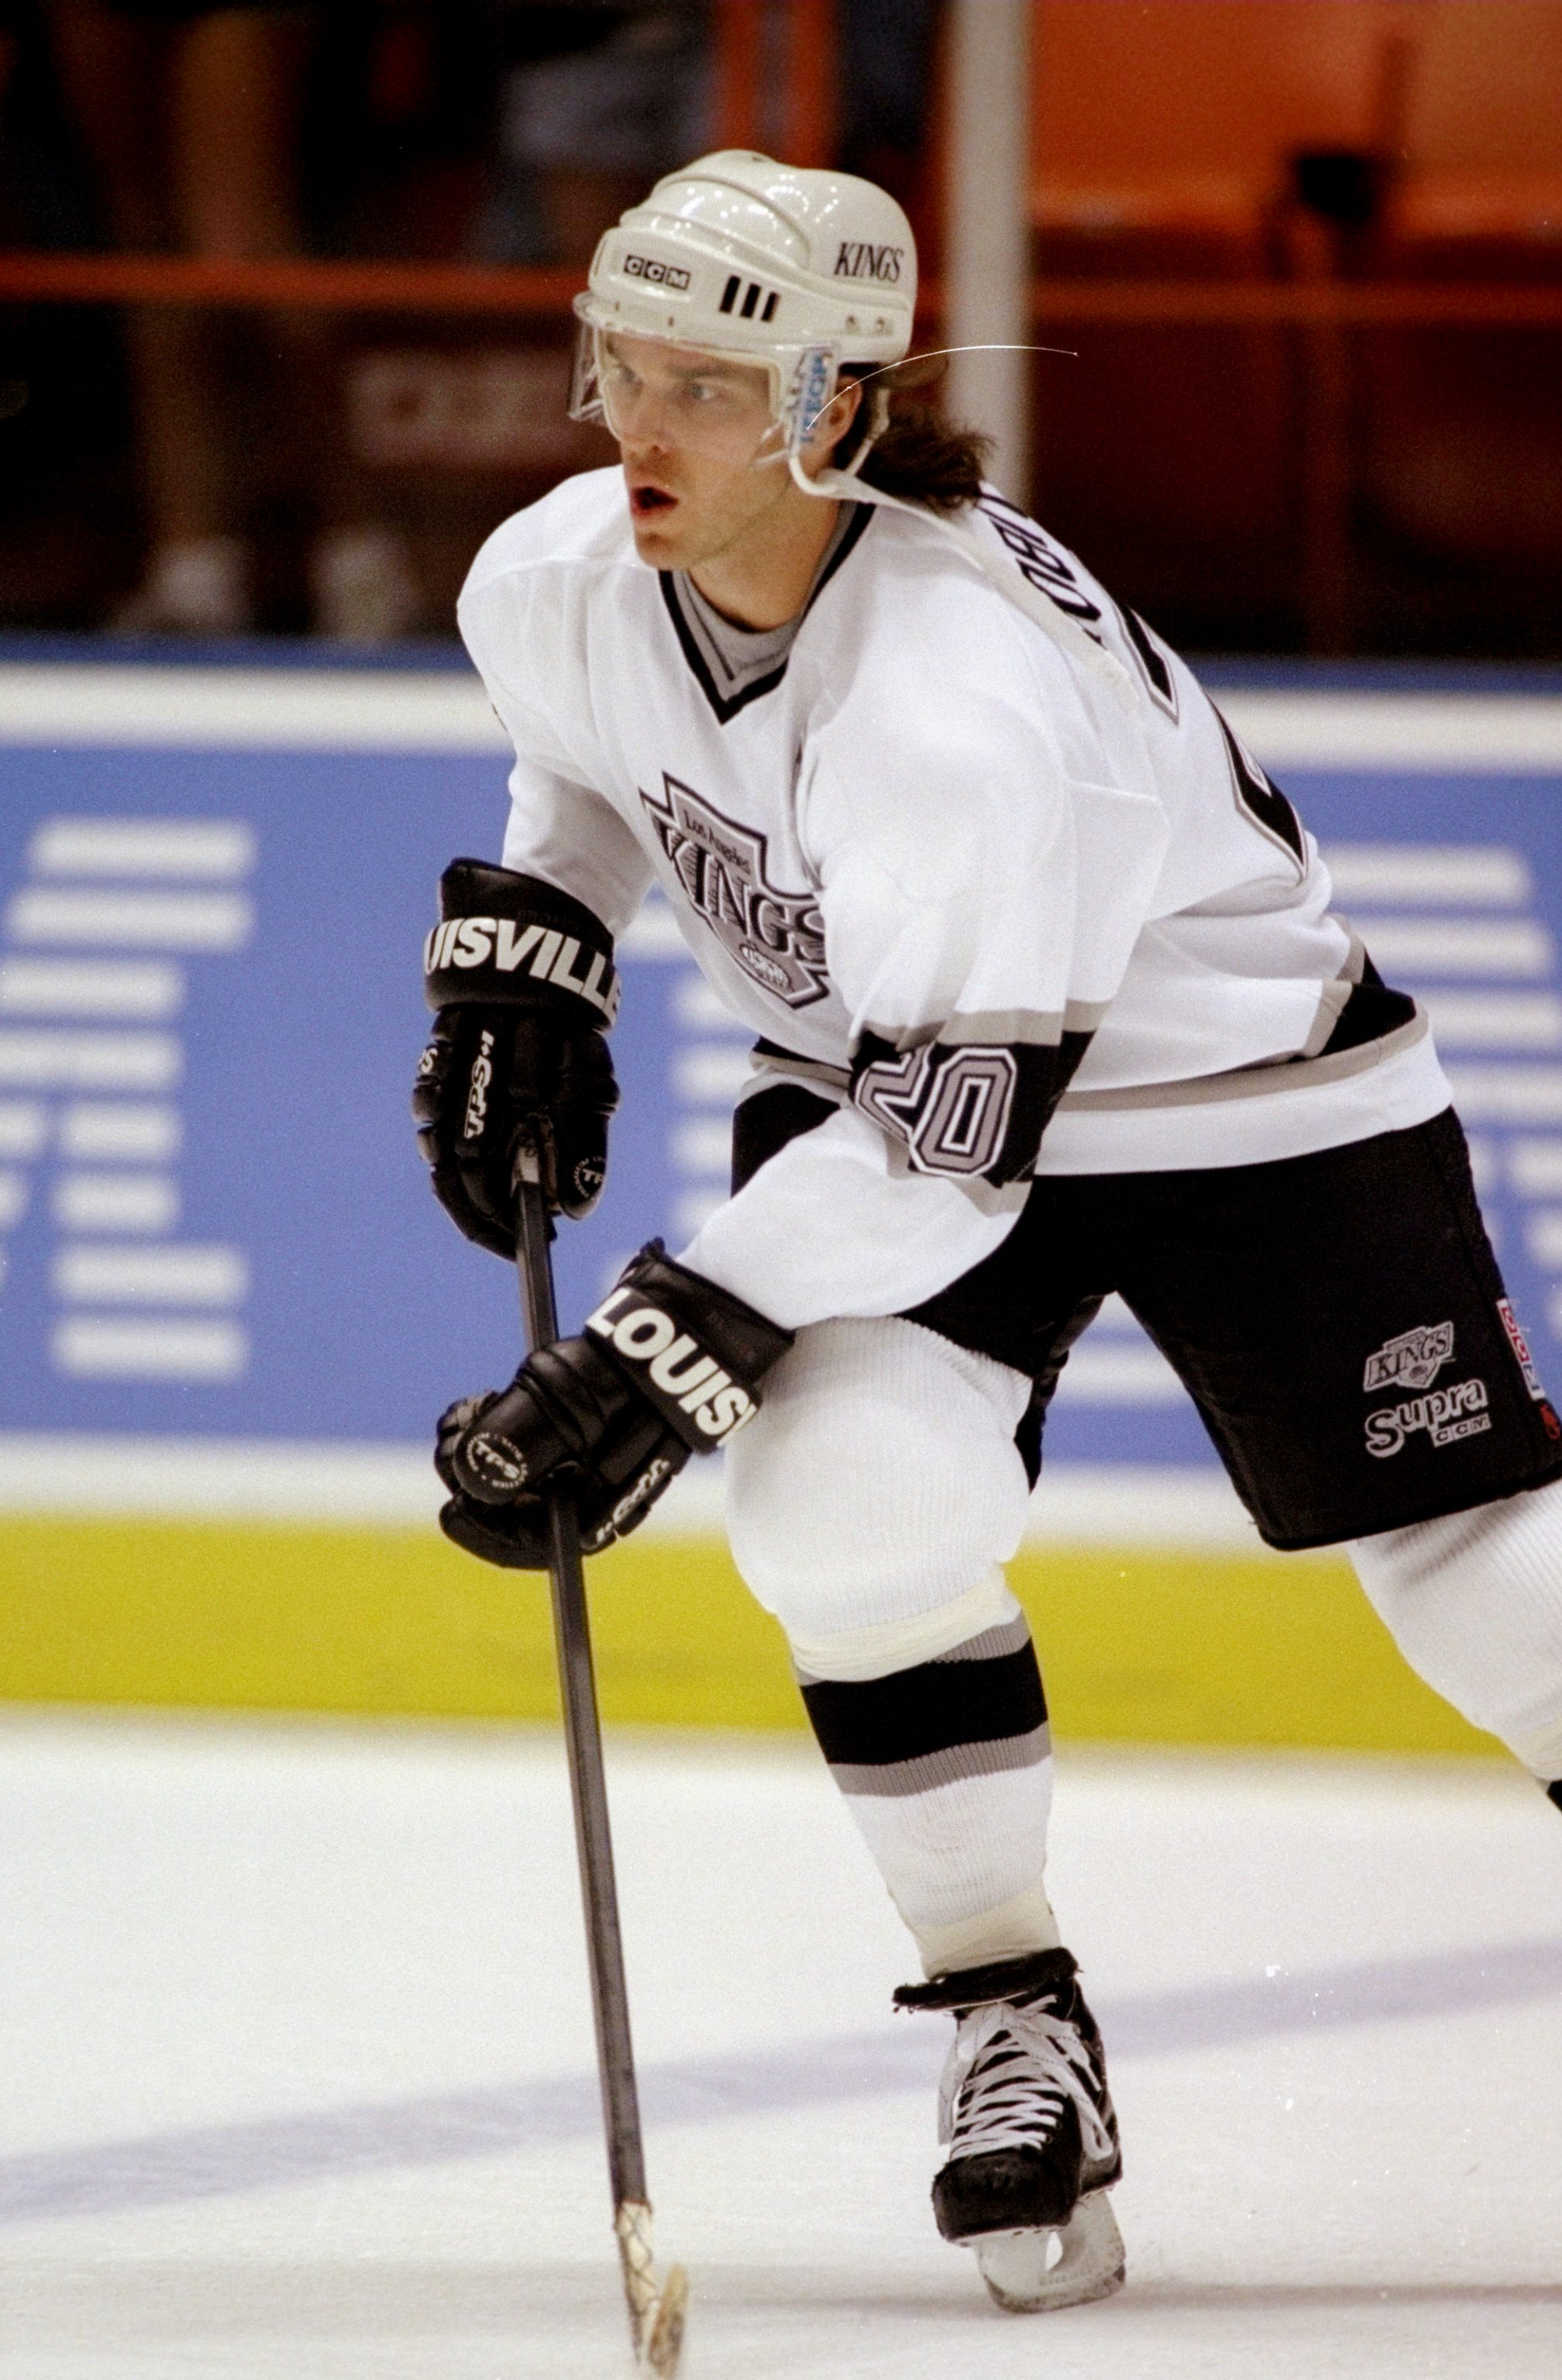 Luc Robitaille tells awesome story why he's called Lucky Luc, and